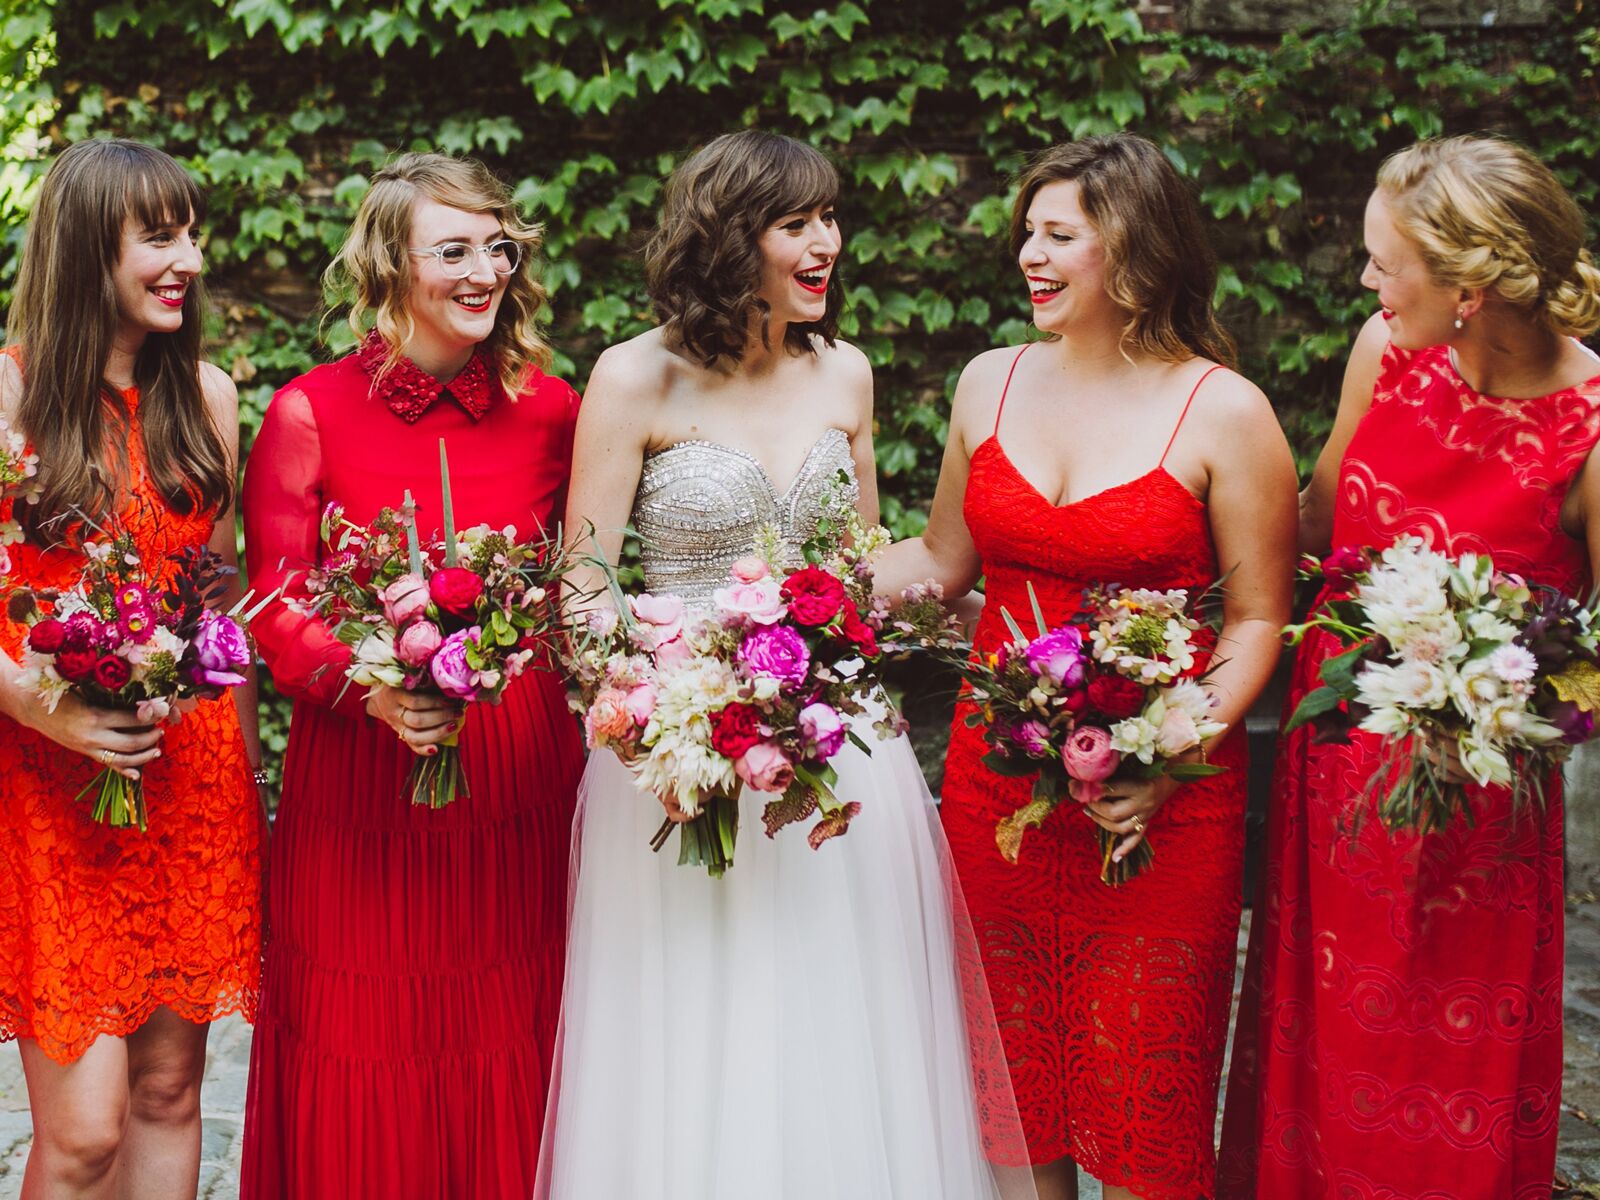 Mismatched Bridesmaid Dresses in Red, Orange and Pink